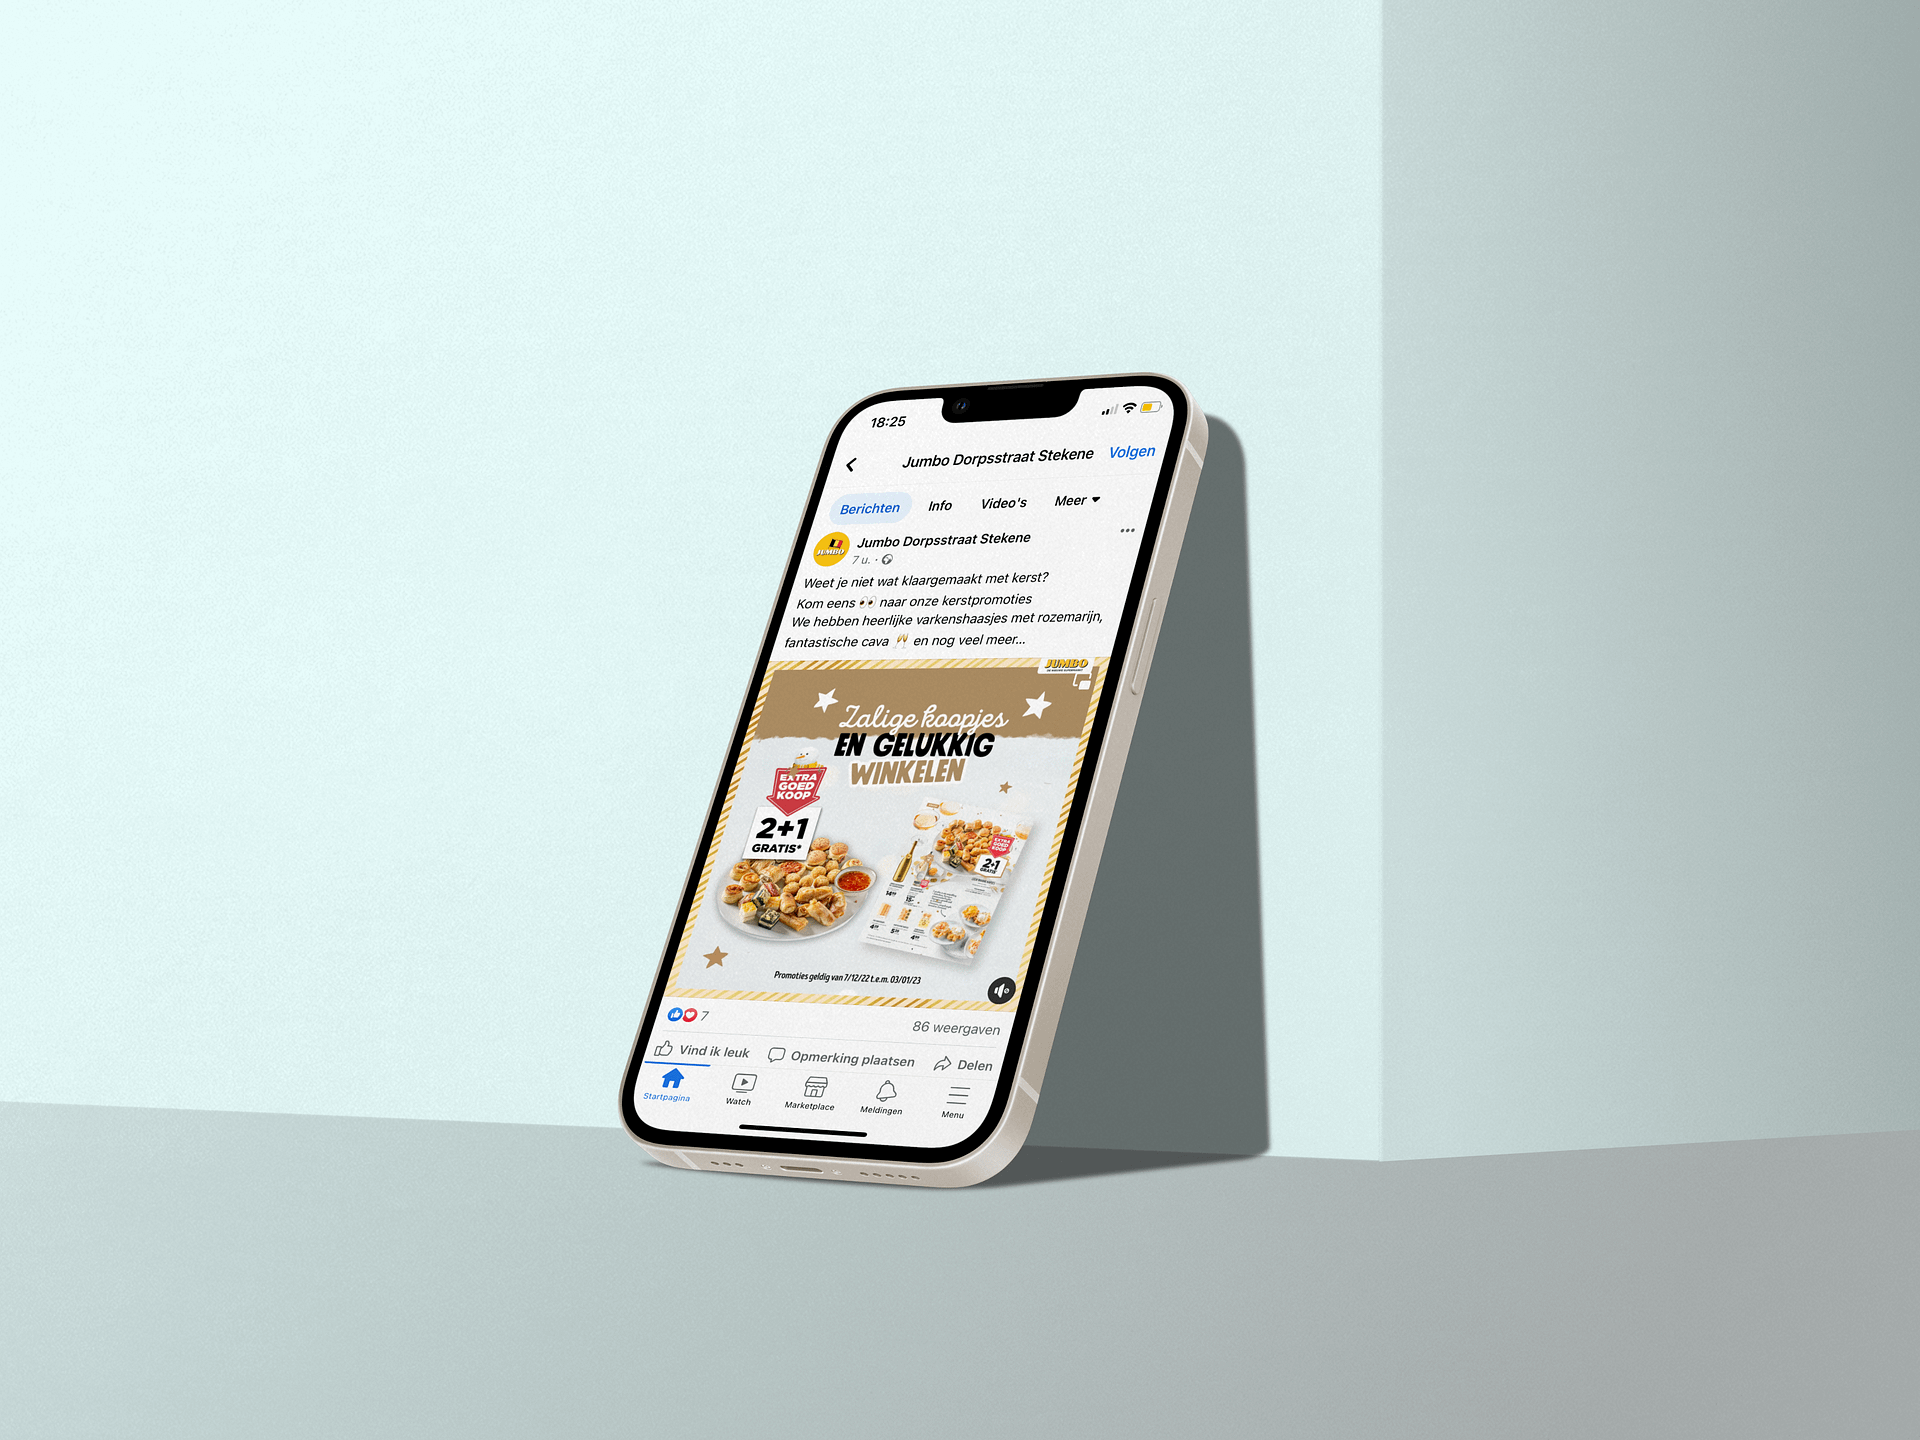 light-and-dark-theme-iphone-13-perspective-mockup-template-6394c24408e533dc83b82165@2x